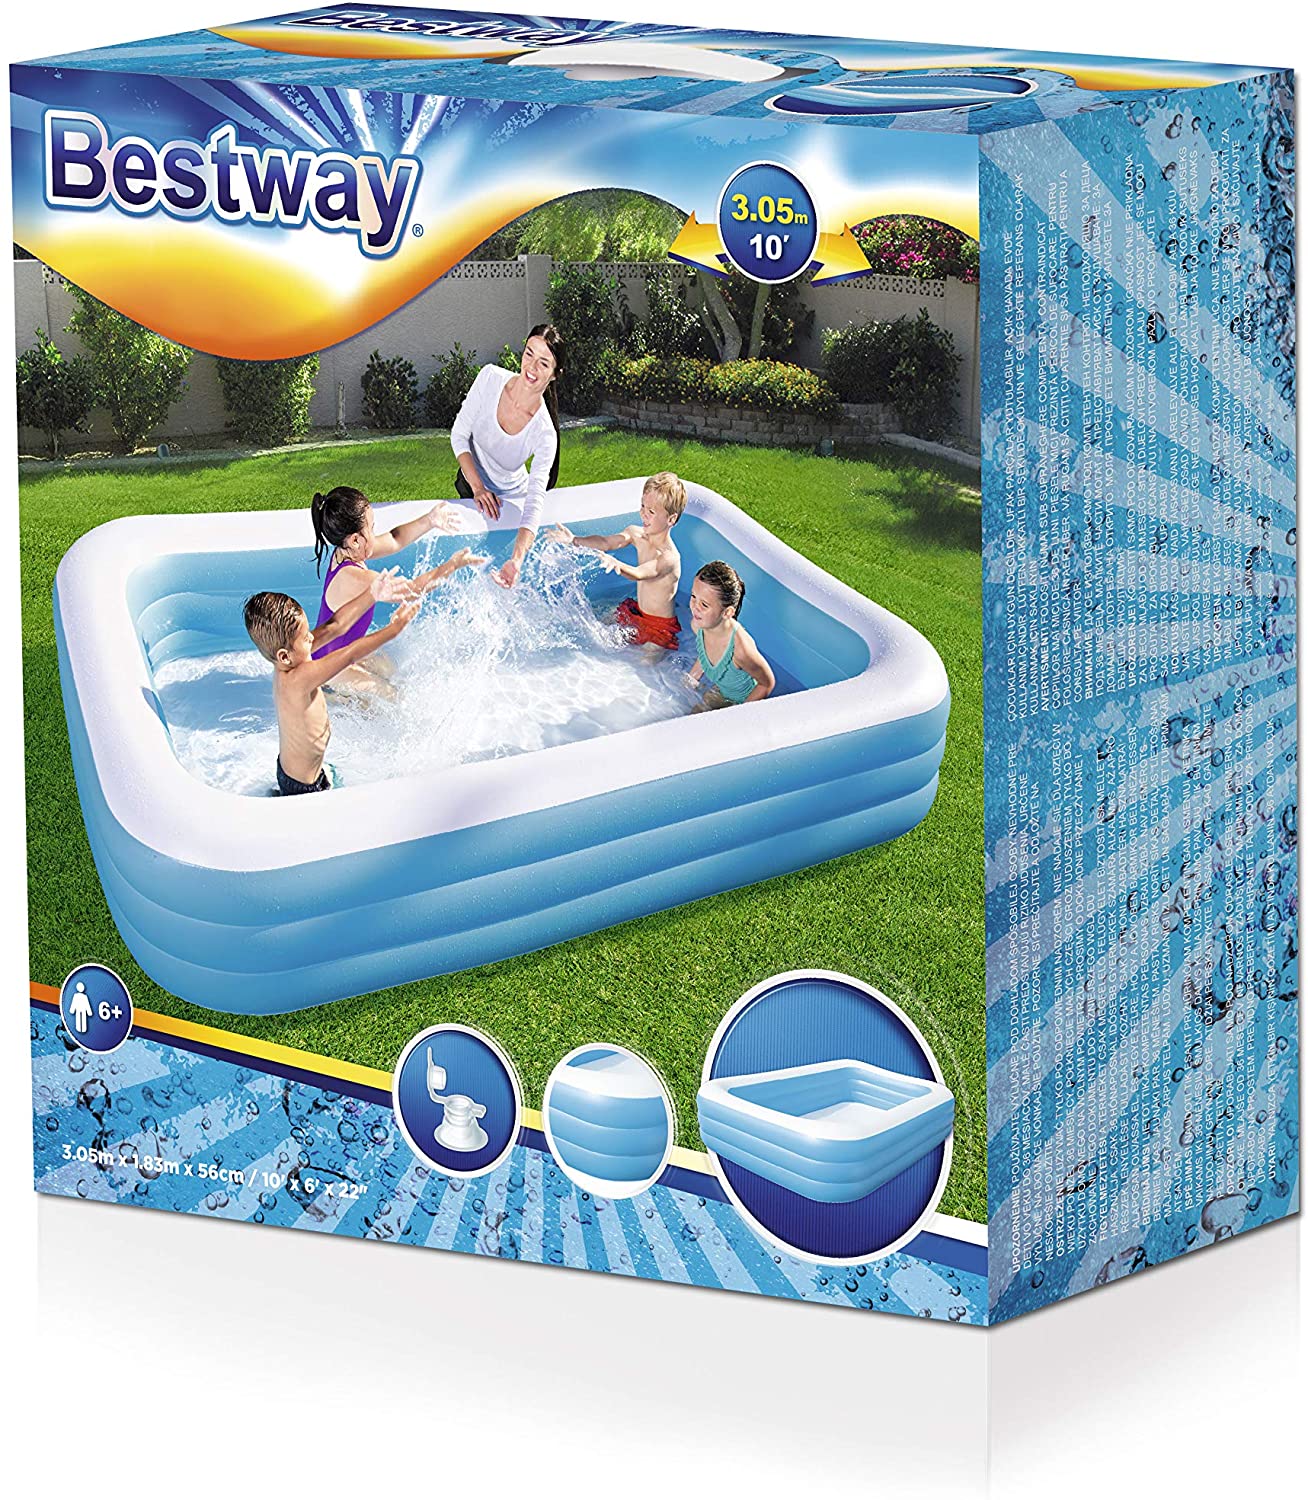 10ft Rectangular Inflatable Paddling Pool Kids and Family Large pool Easy to Assemble Blue Pool with Drainage Plug in Size 305 cm x 183 cm x 50 cm 